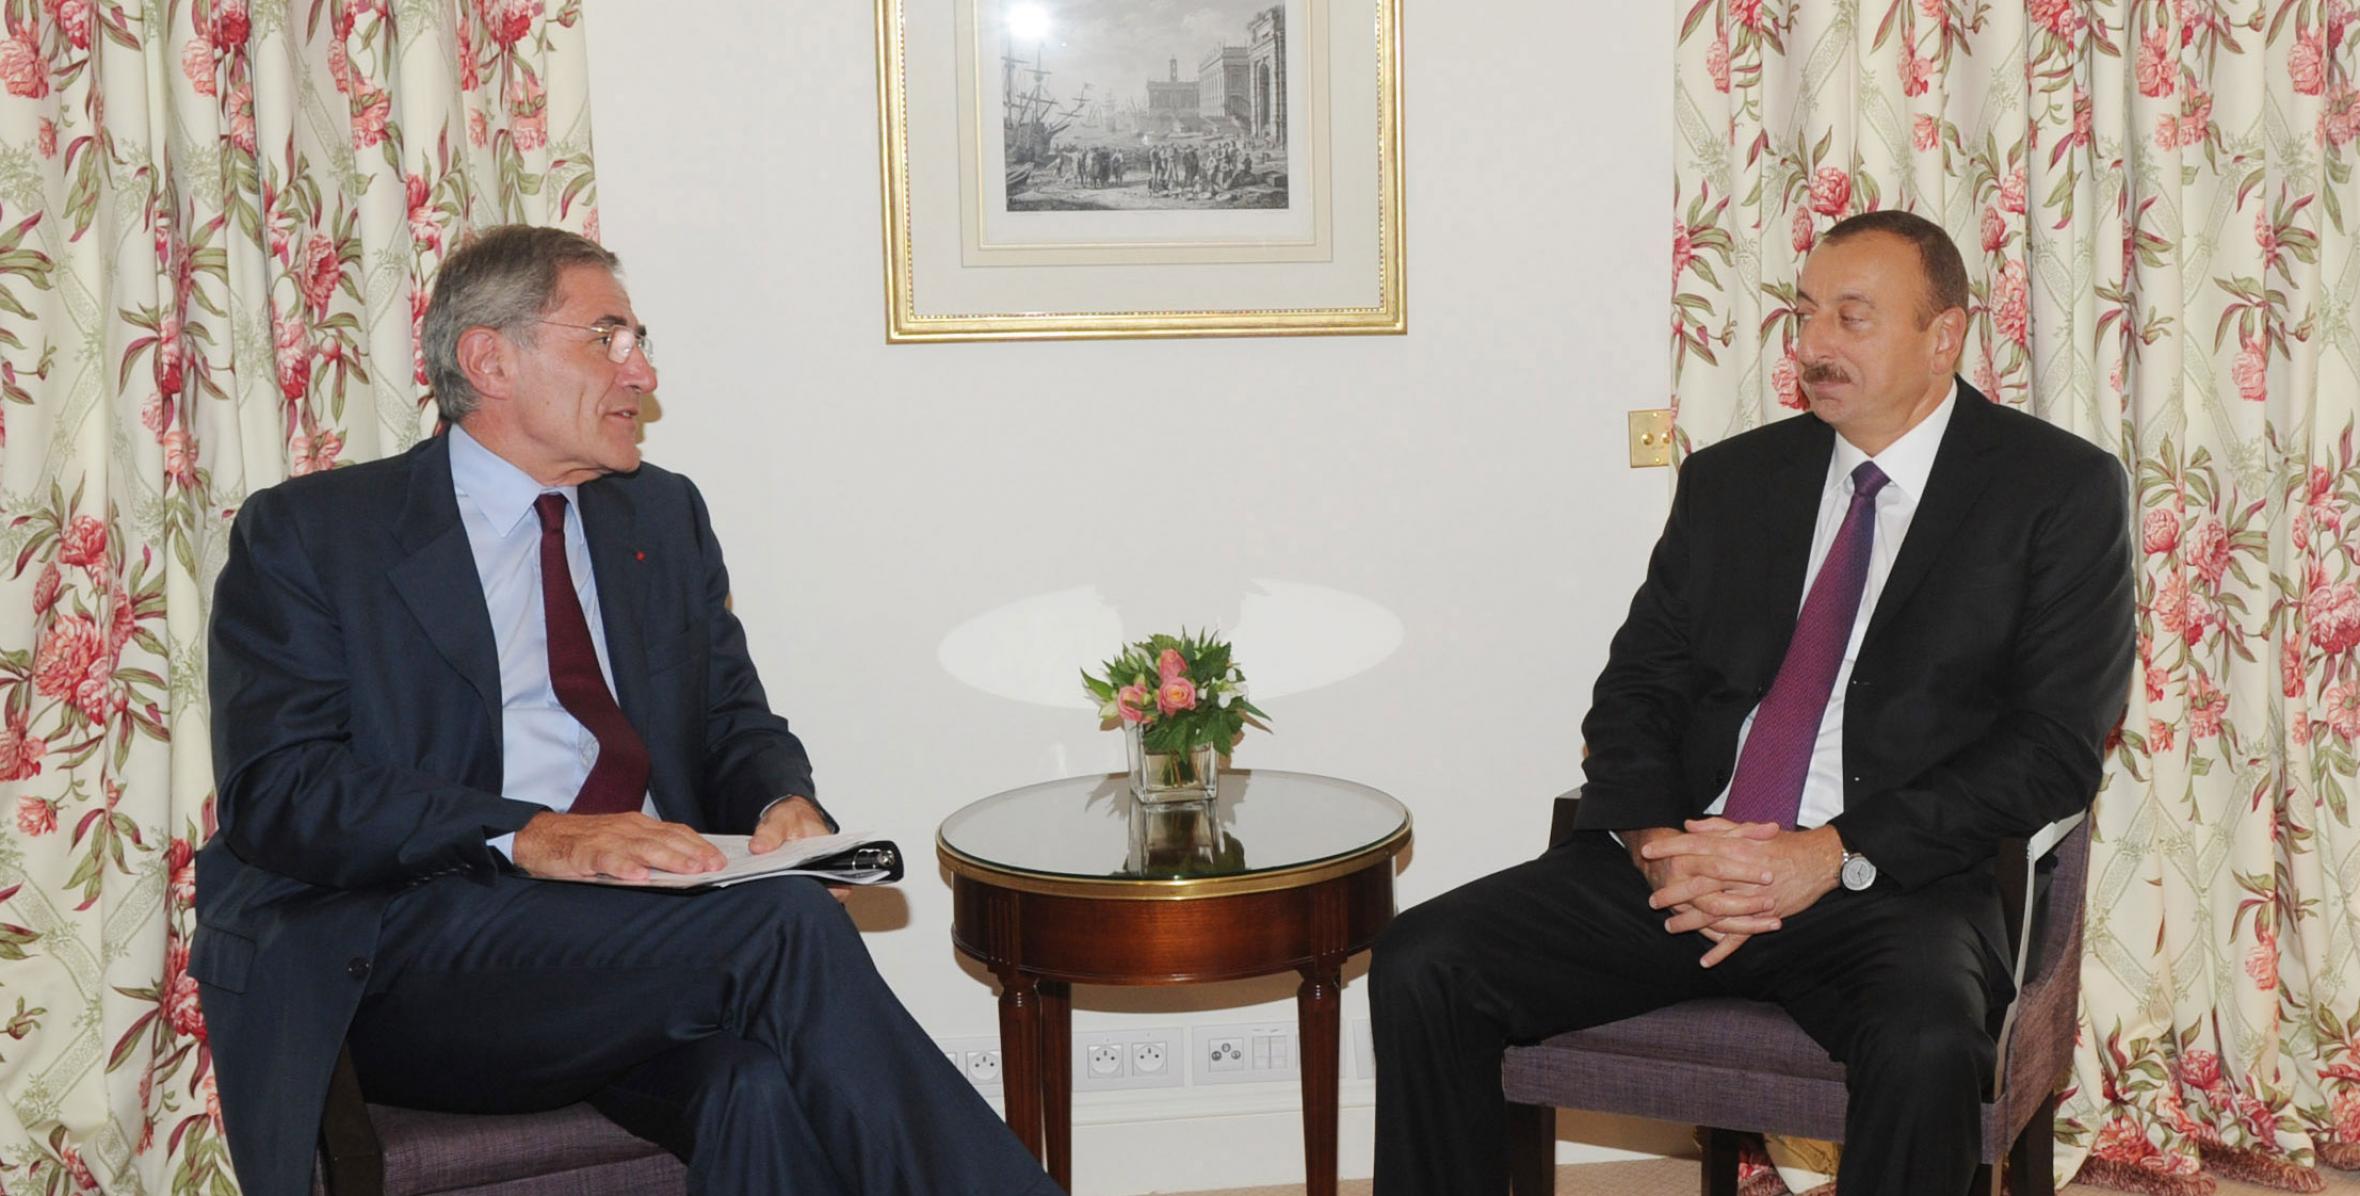 Ilham Aliyev met with Chairman and CEO of GDF Suez, Gérard Mestralle